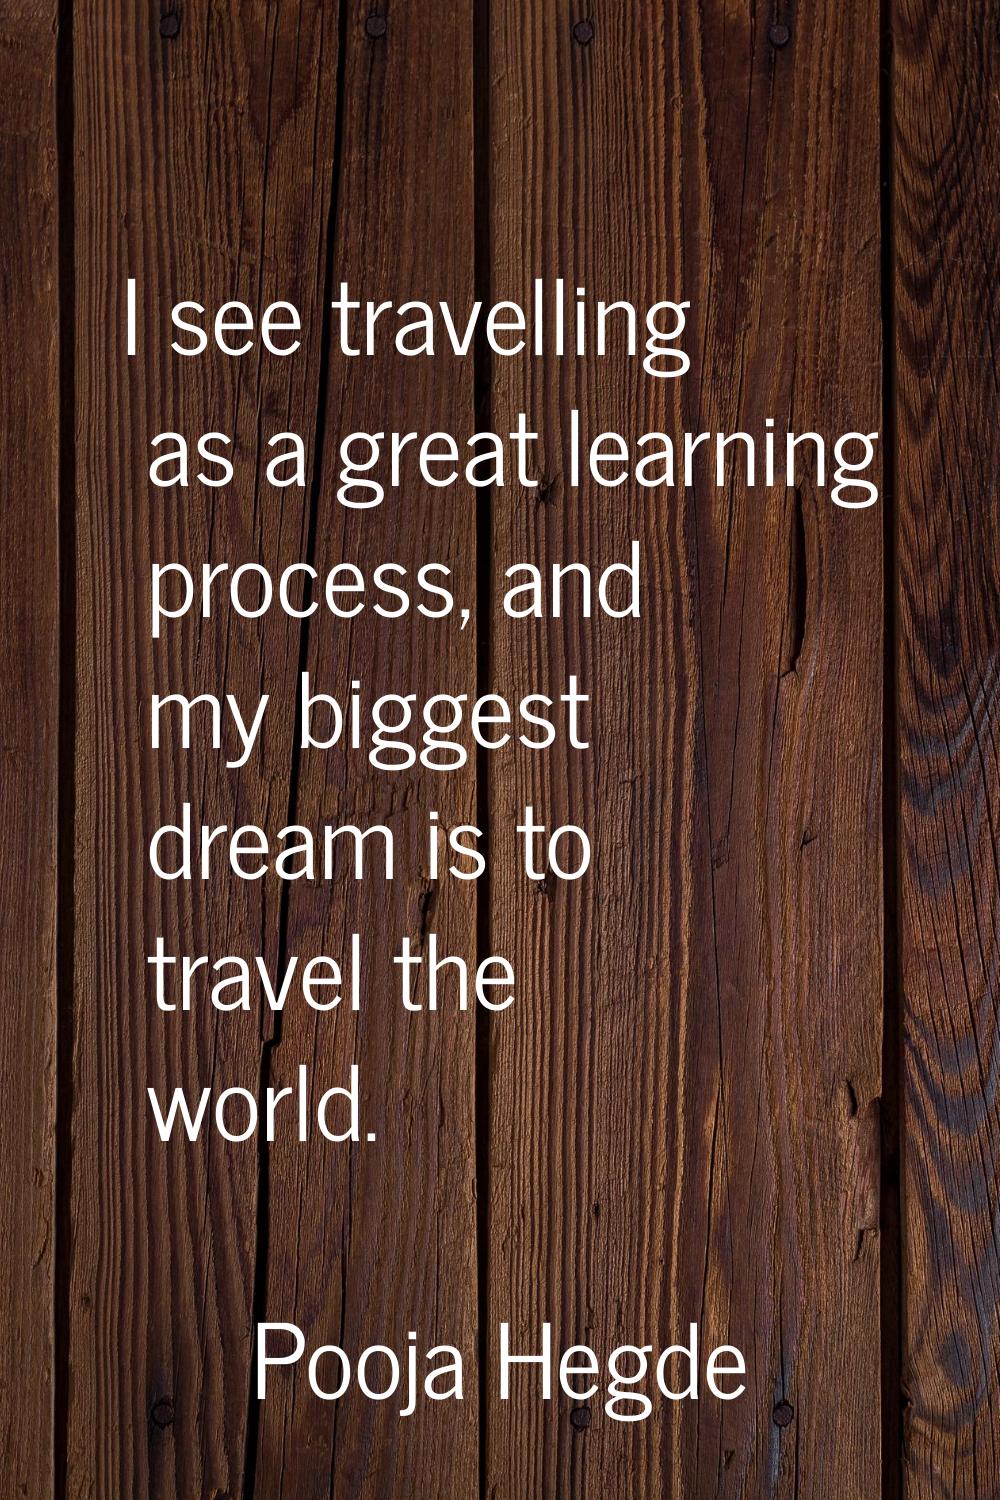 I see travelling as a great learning process, and my biggest dream is to travel the world.